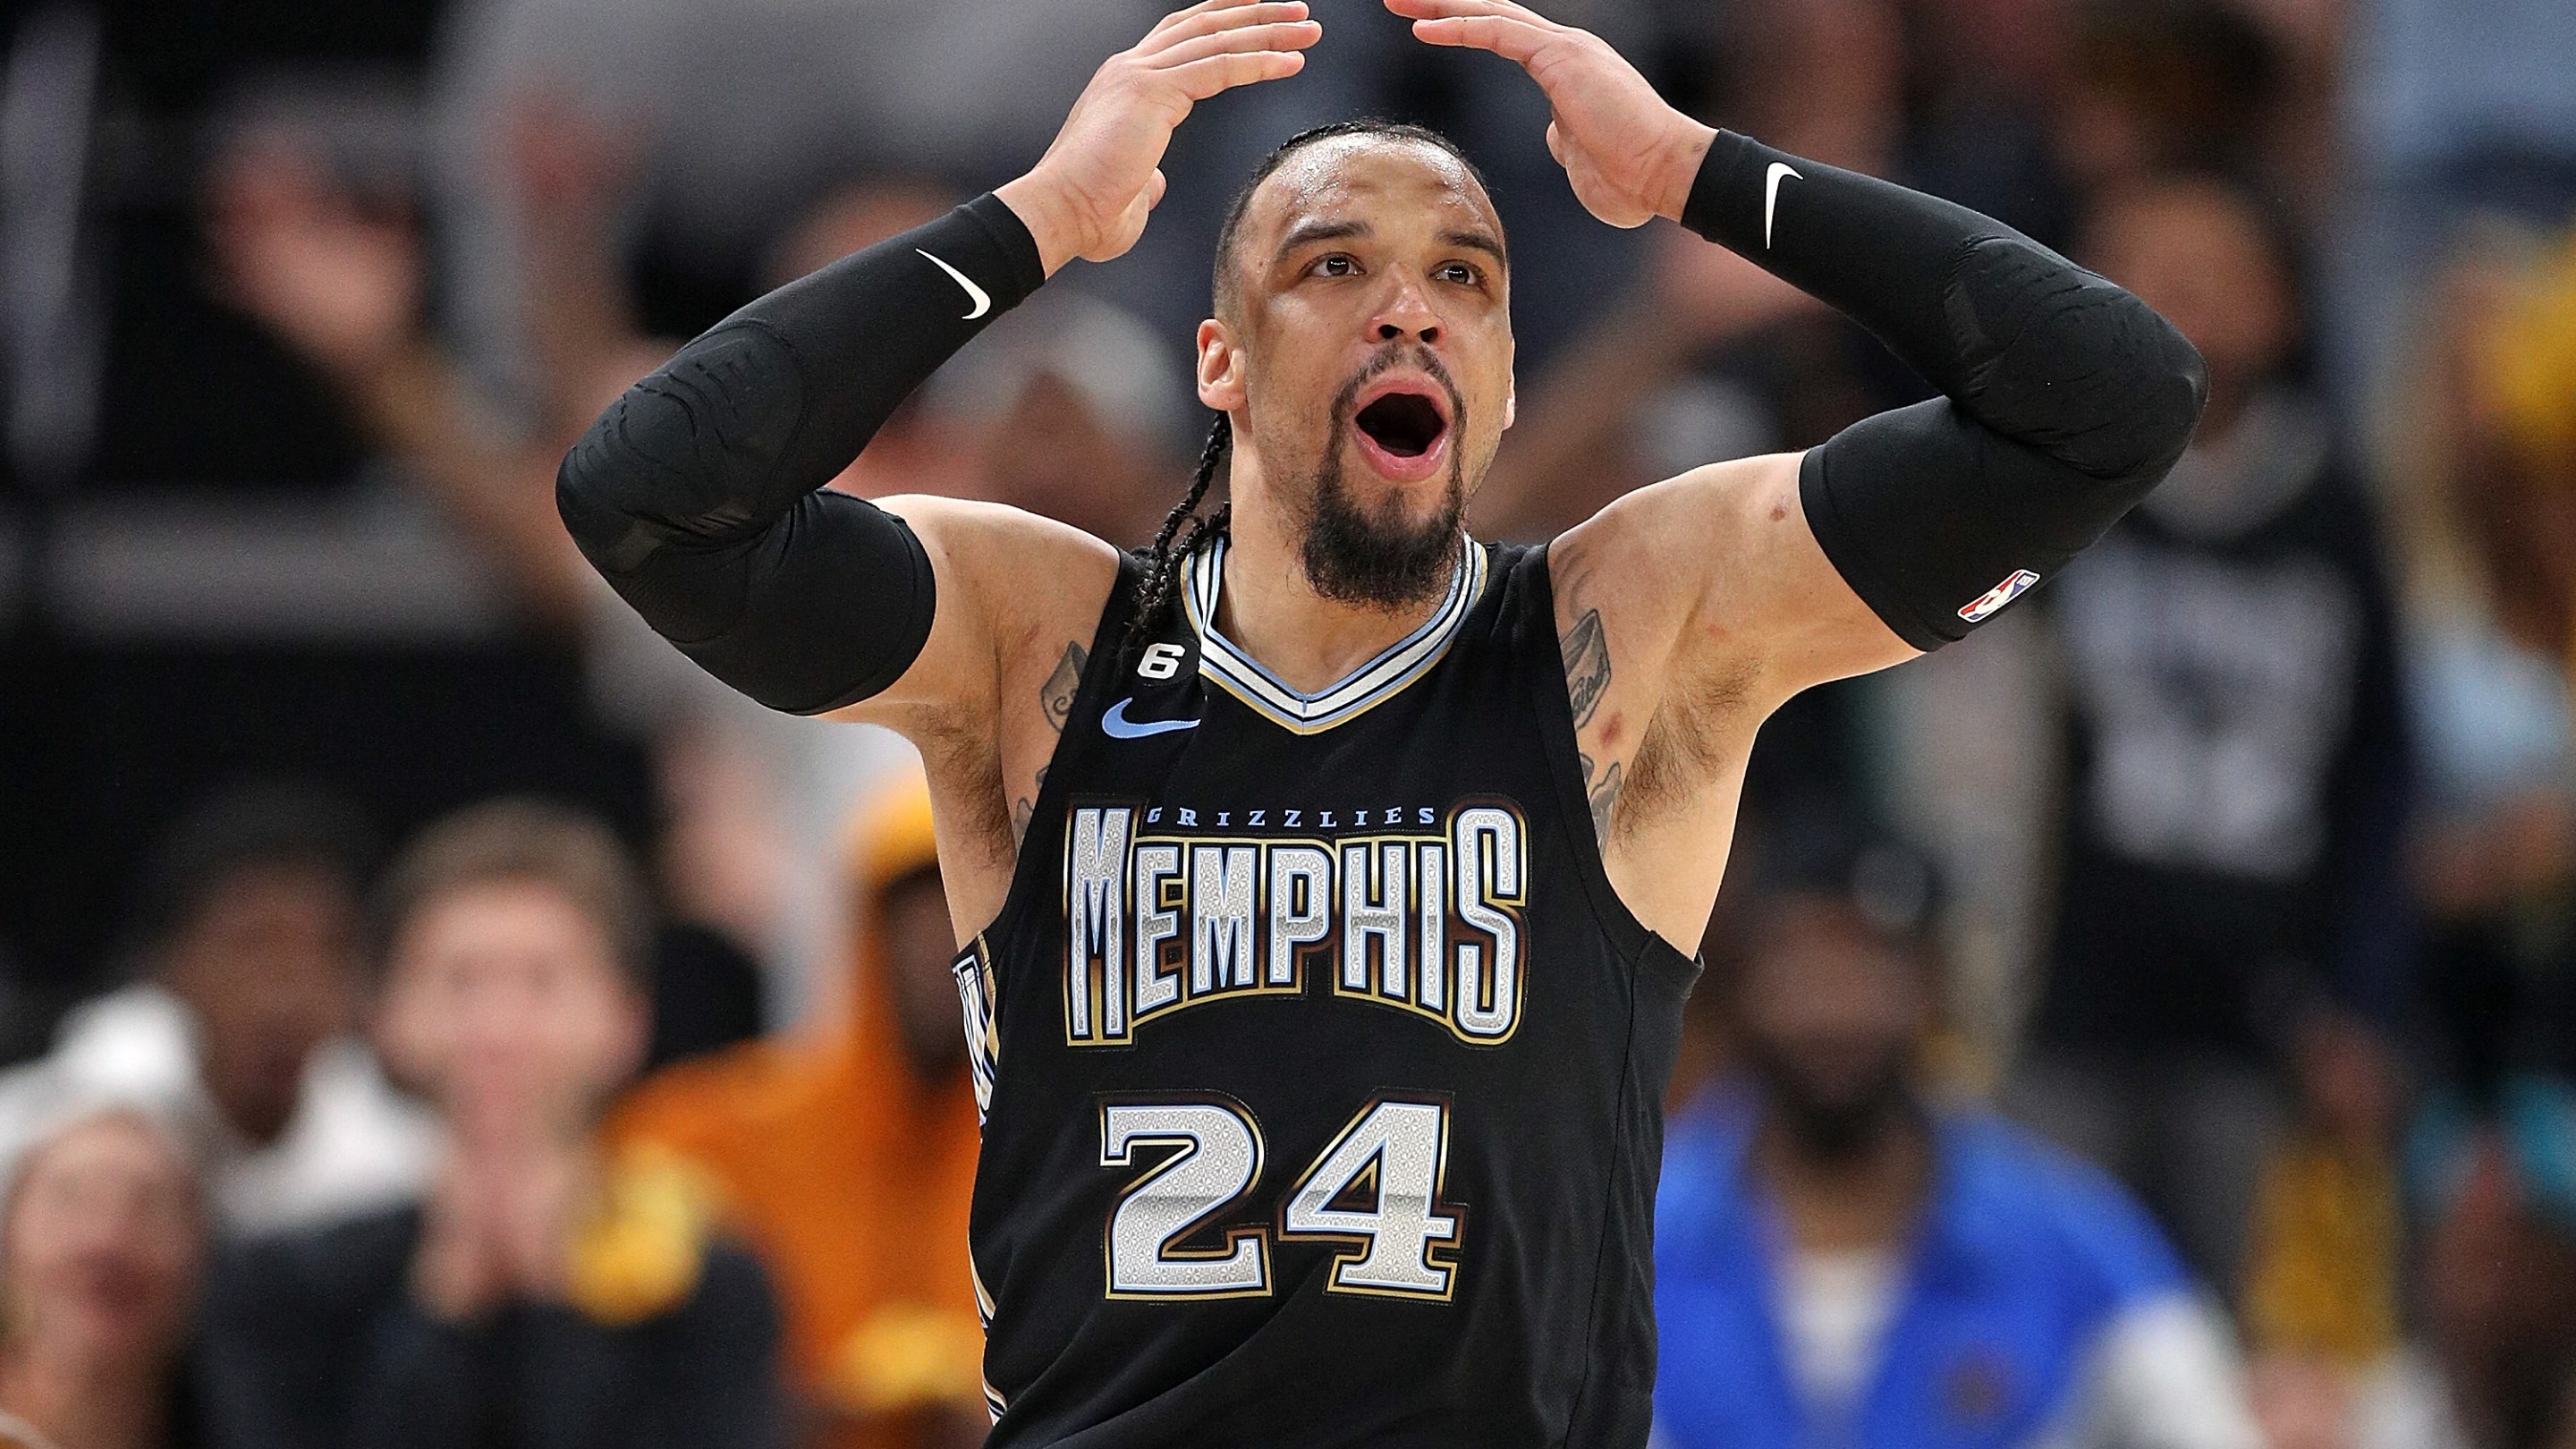 MEMPHIS, TENNESSEE - APRIL 19: Dillon Brooks #24 of the Memphis Grizzlies reacts against the Los Angeles Lakers during the second half of Game Two of the Western Conference First Round Playoffs at FedExForum on April 16, 2023 in Memphis, Tennessee. NOTE TO USER: User expressly acknowledges and agrees that, by downloading and or using this photograph, User is consenting to the terms and conditions of the Getty Images License Agreement. at FedExForum on April 19, 2023 in Memphis, Tennessee.